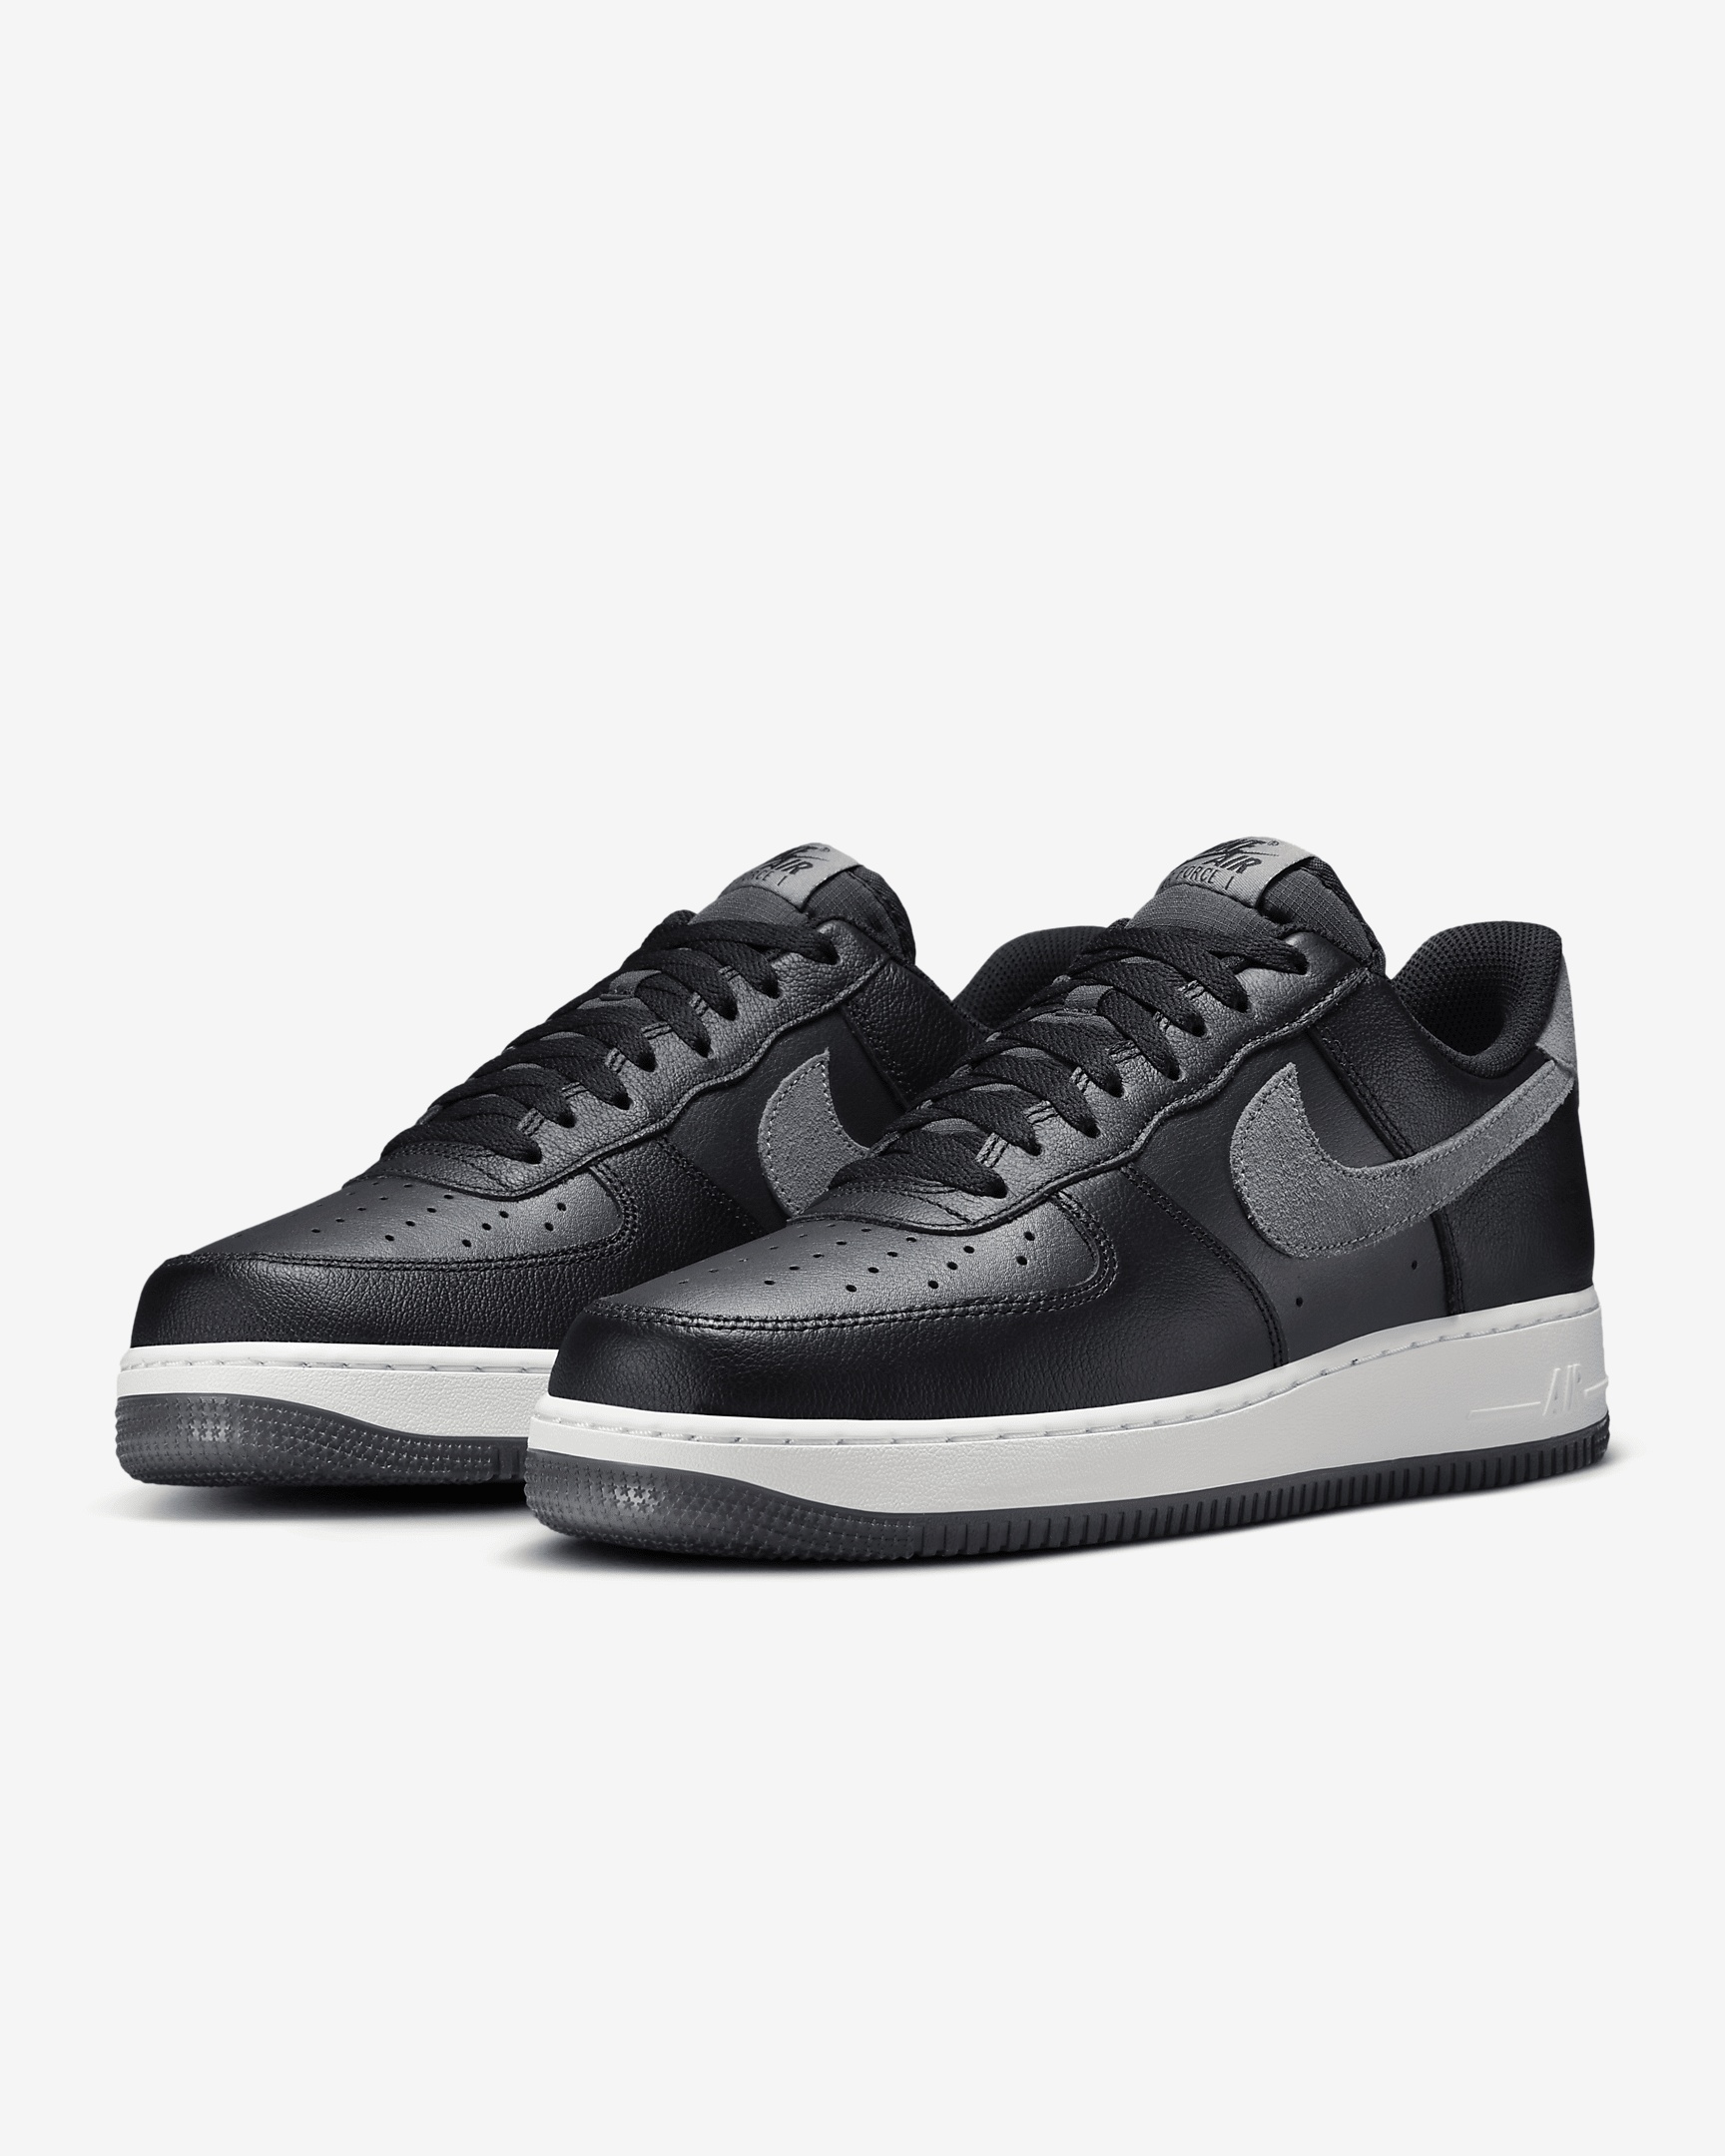 Nike Air Force 1 '07 LV8 Men's Shoes - 5